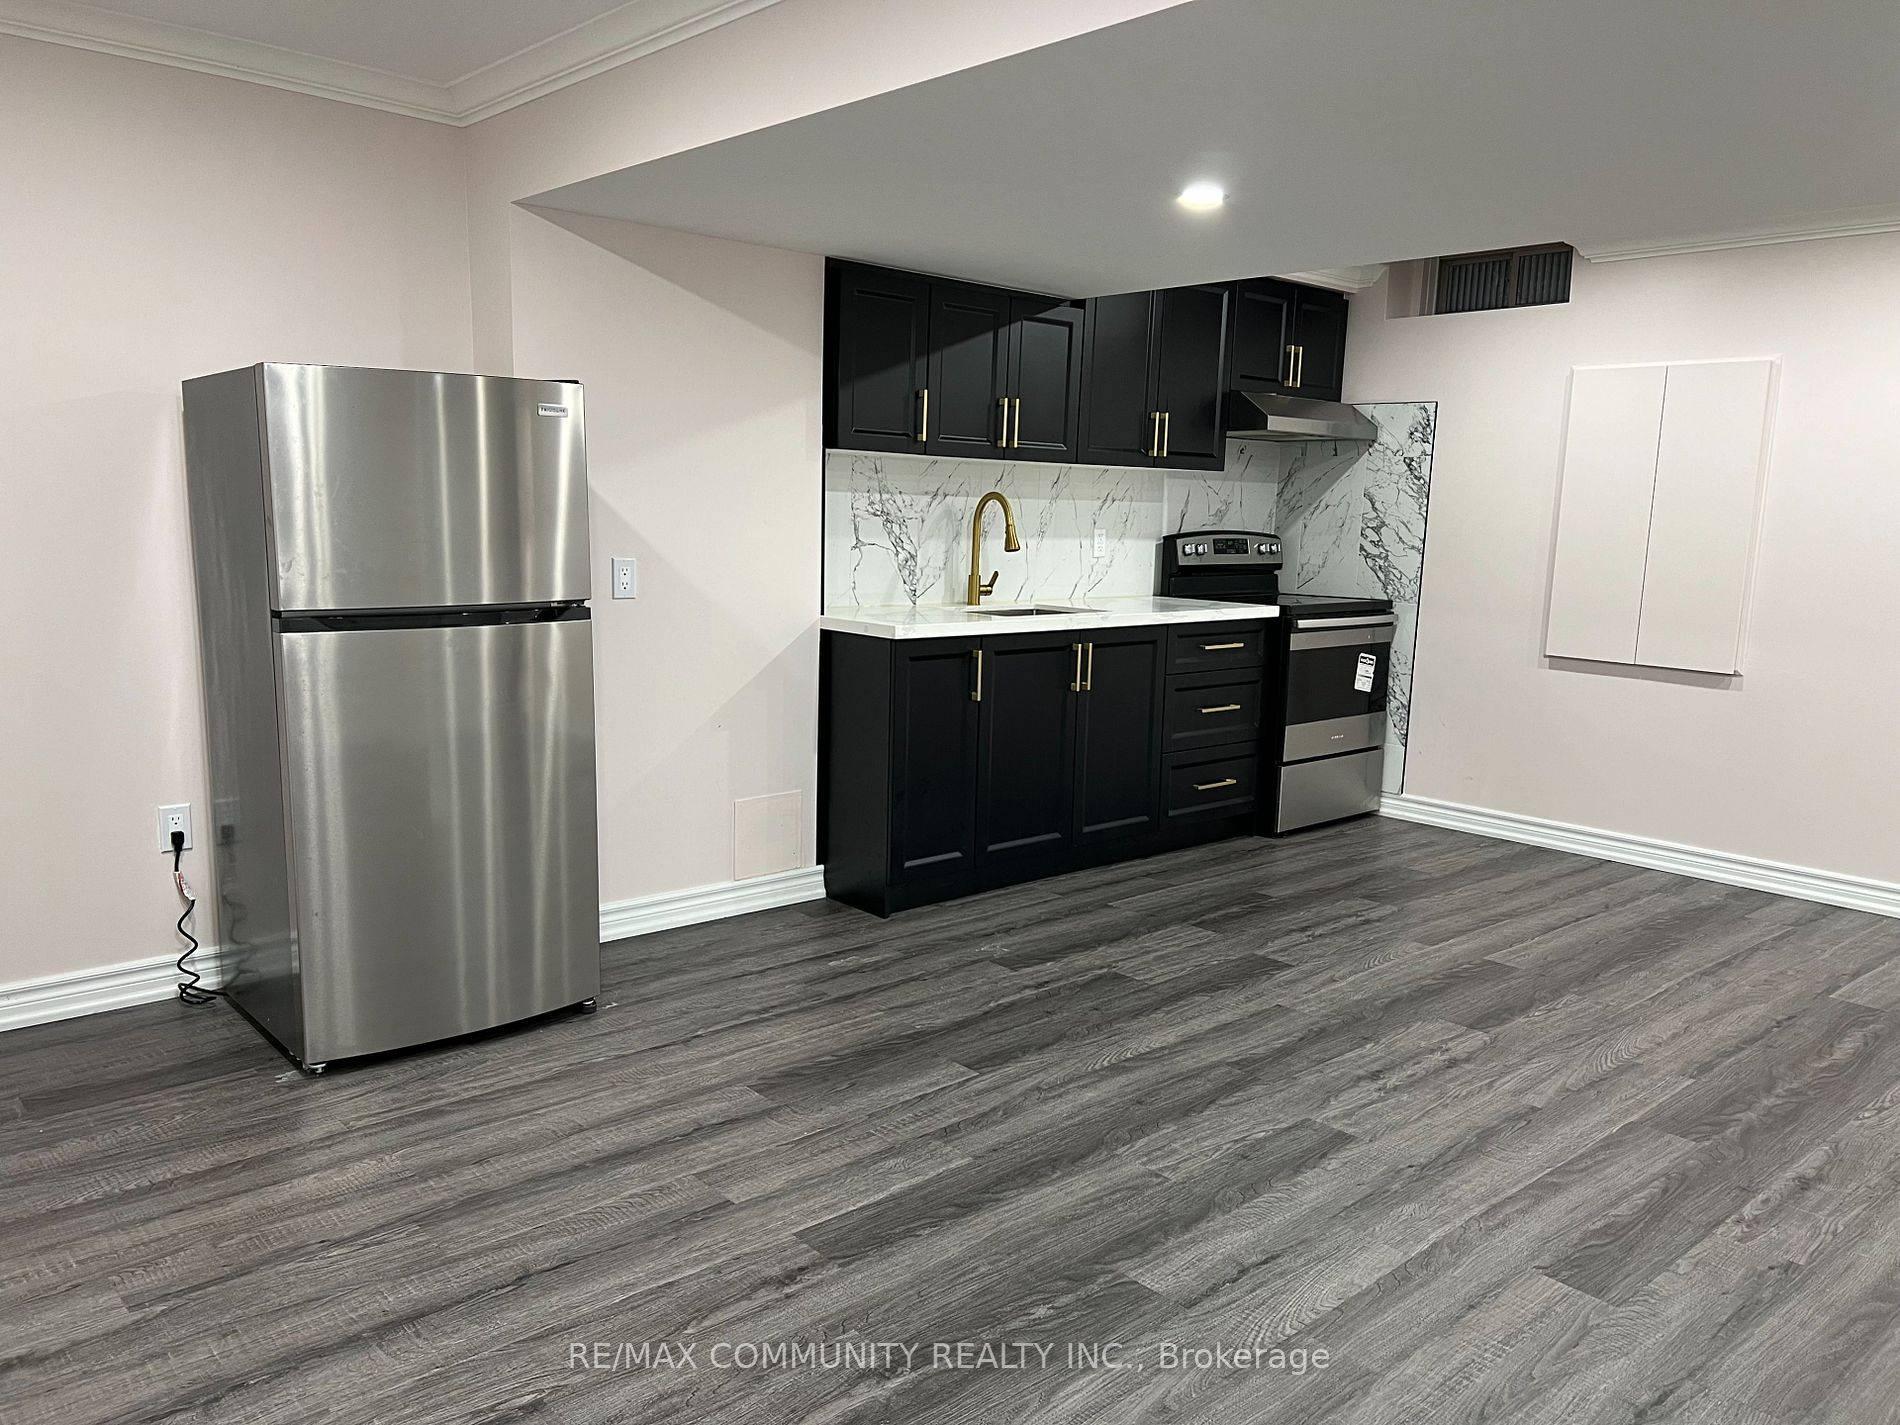 Newly Built Coughlan Homes Luxurious Basement Apartment With 1 Bedroom Den And 1 Bathroom.